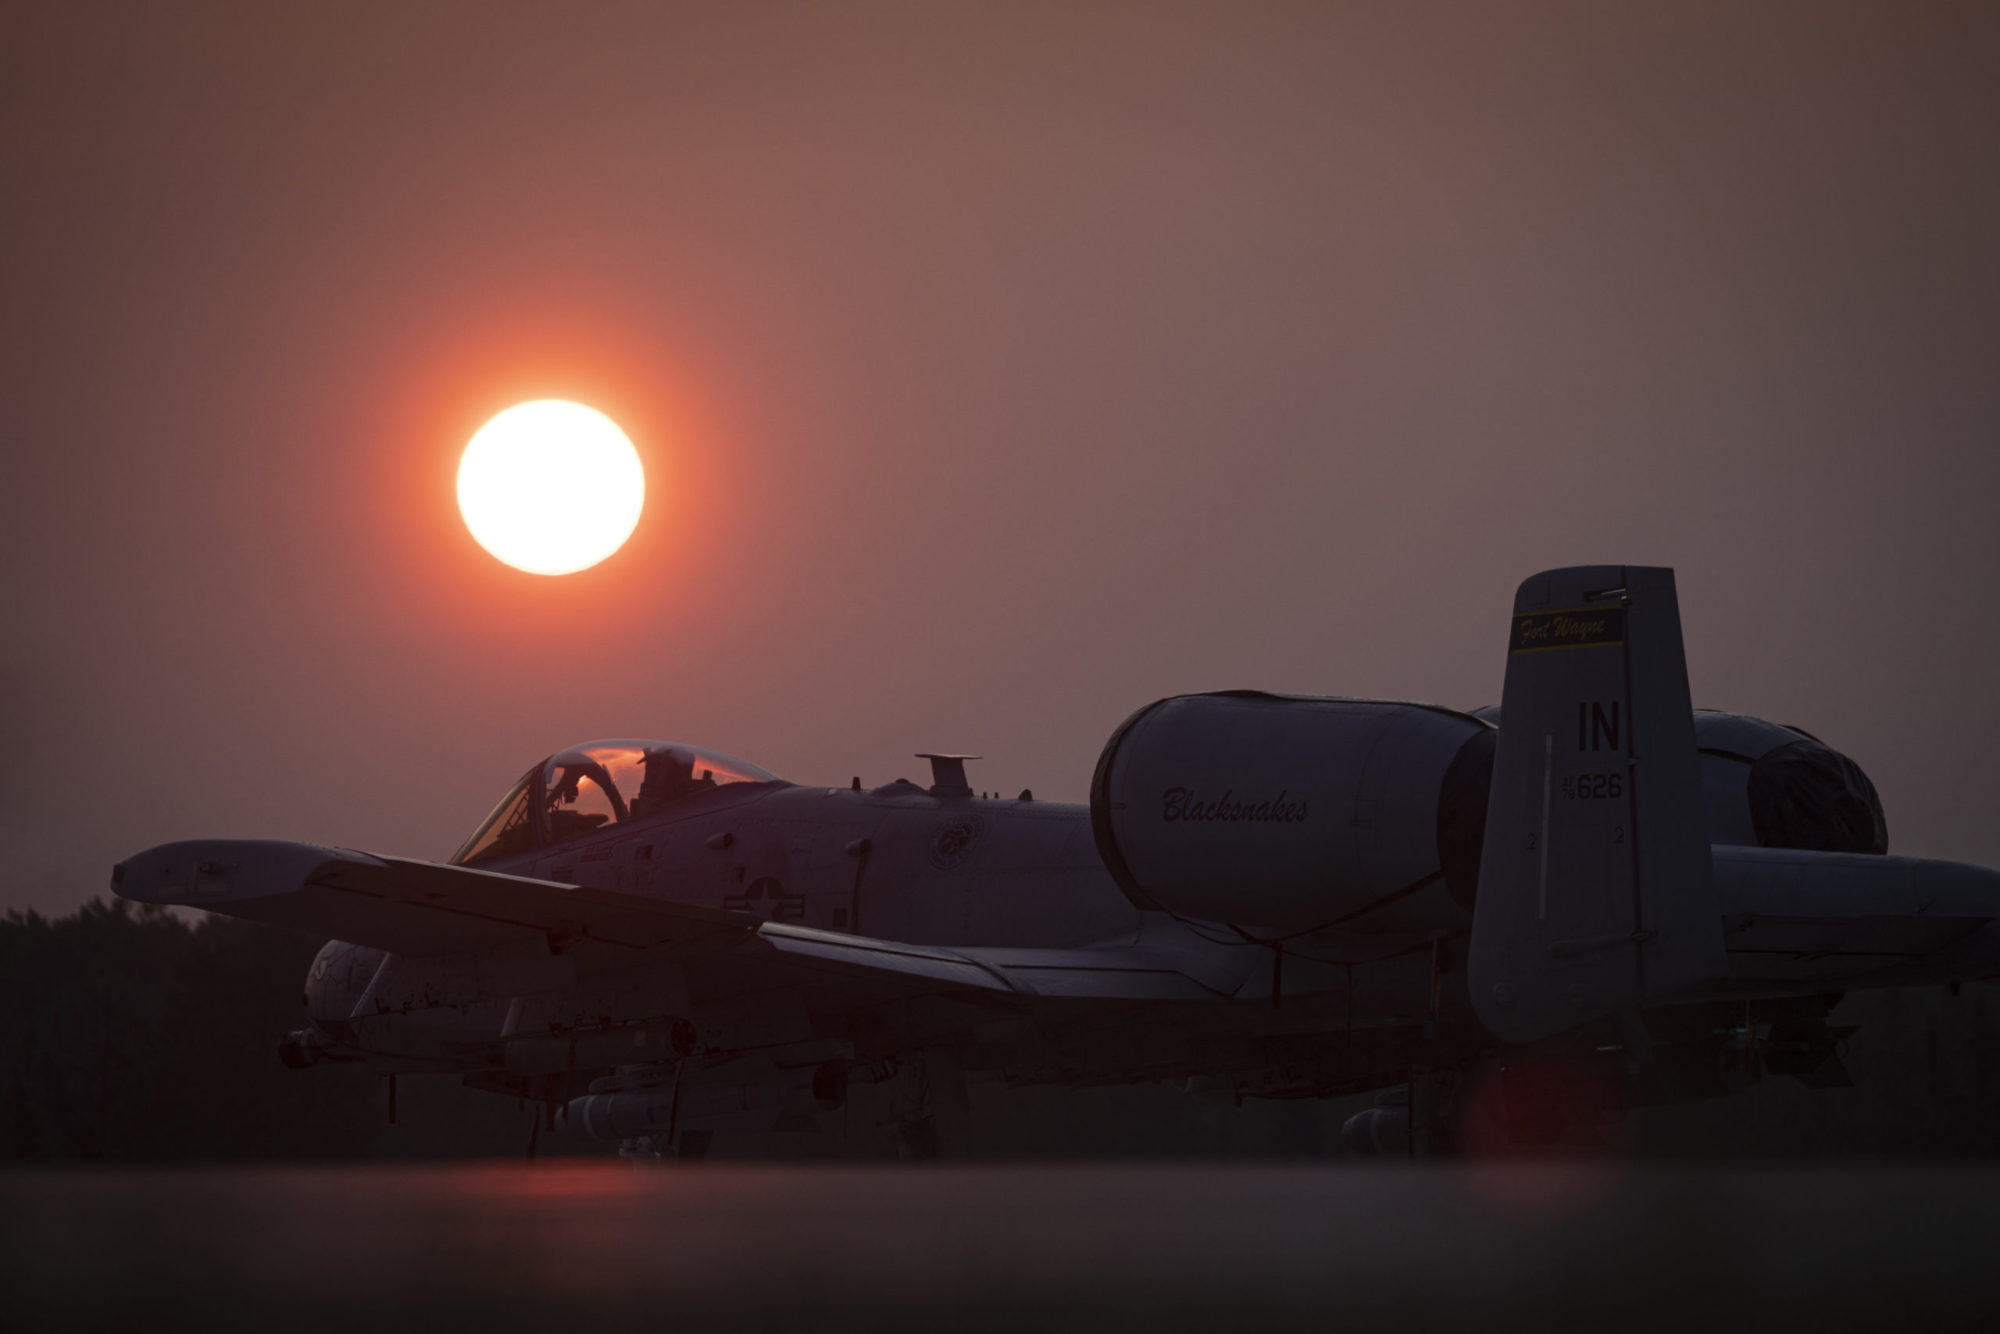 122nd Fighter Wing A-10 aircraft take part in Northern Strike 19